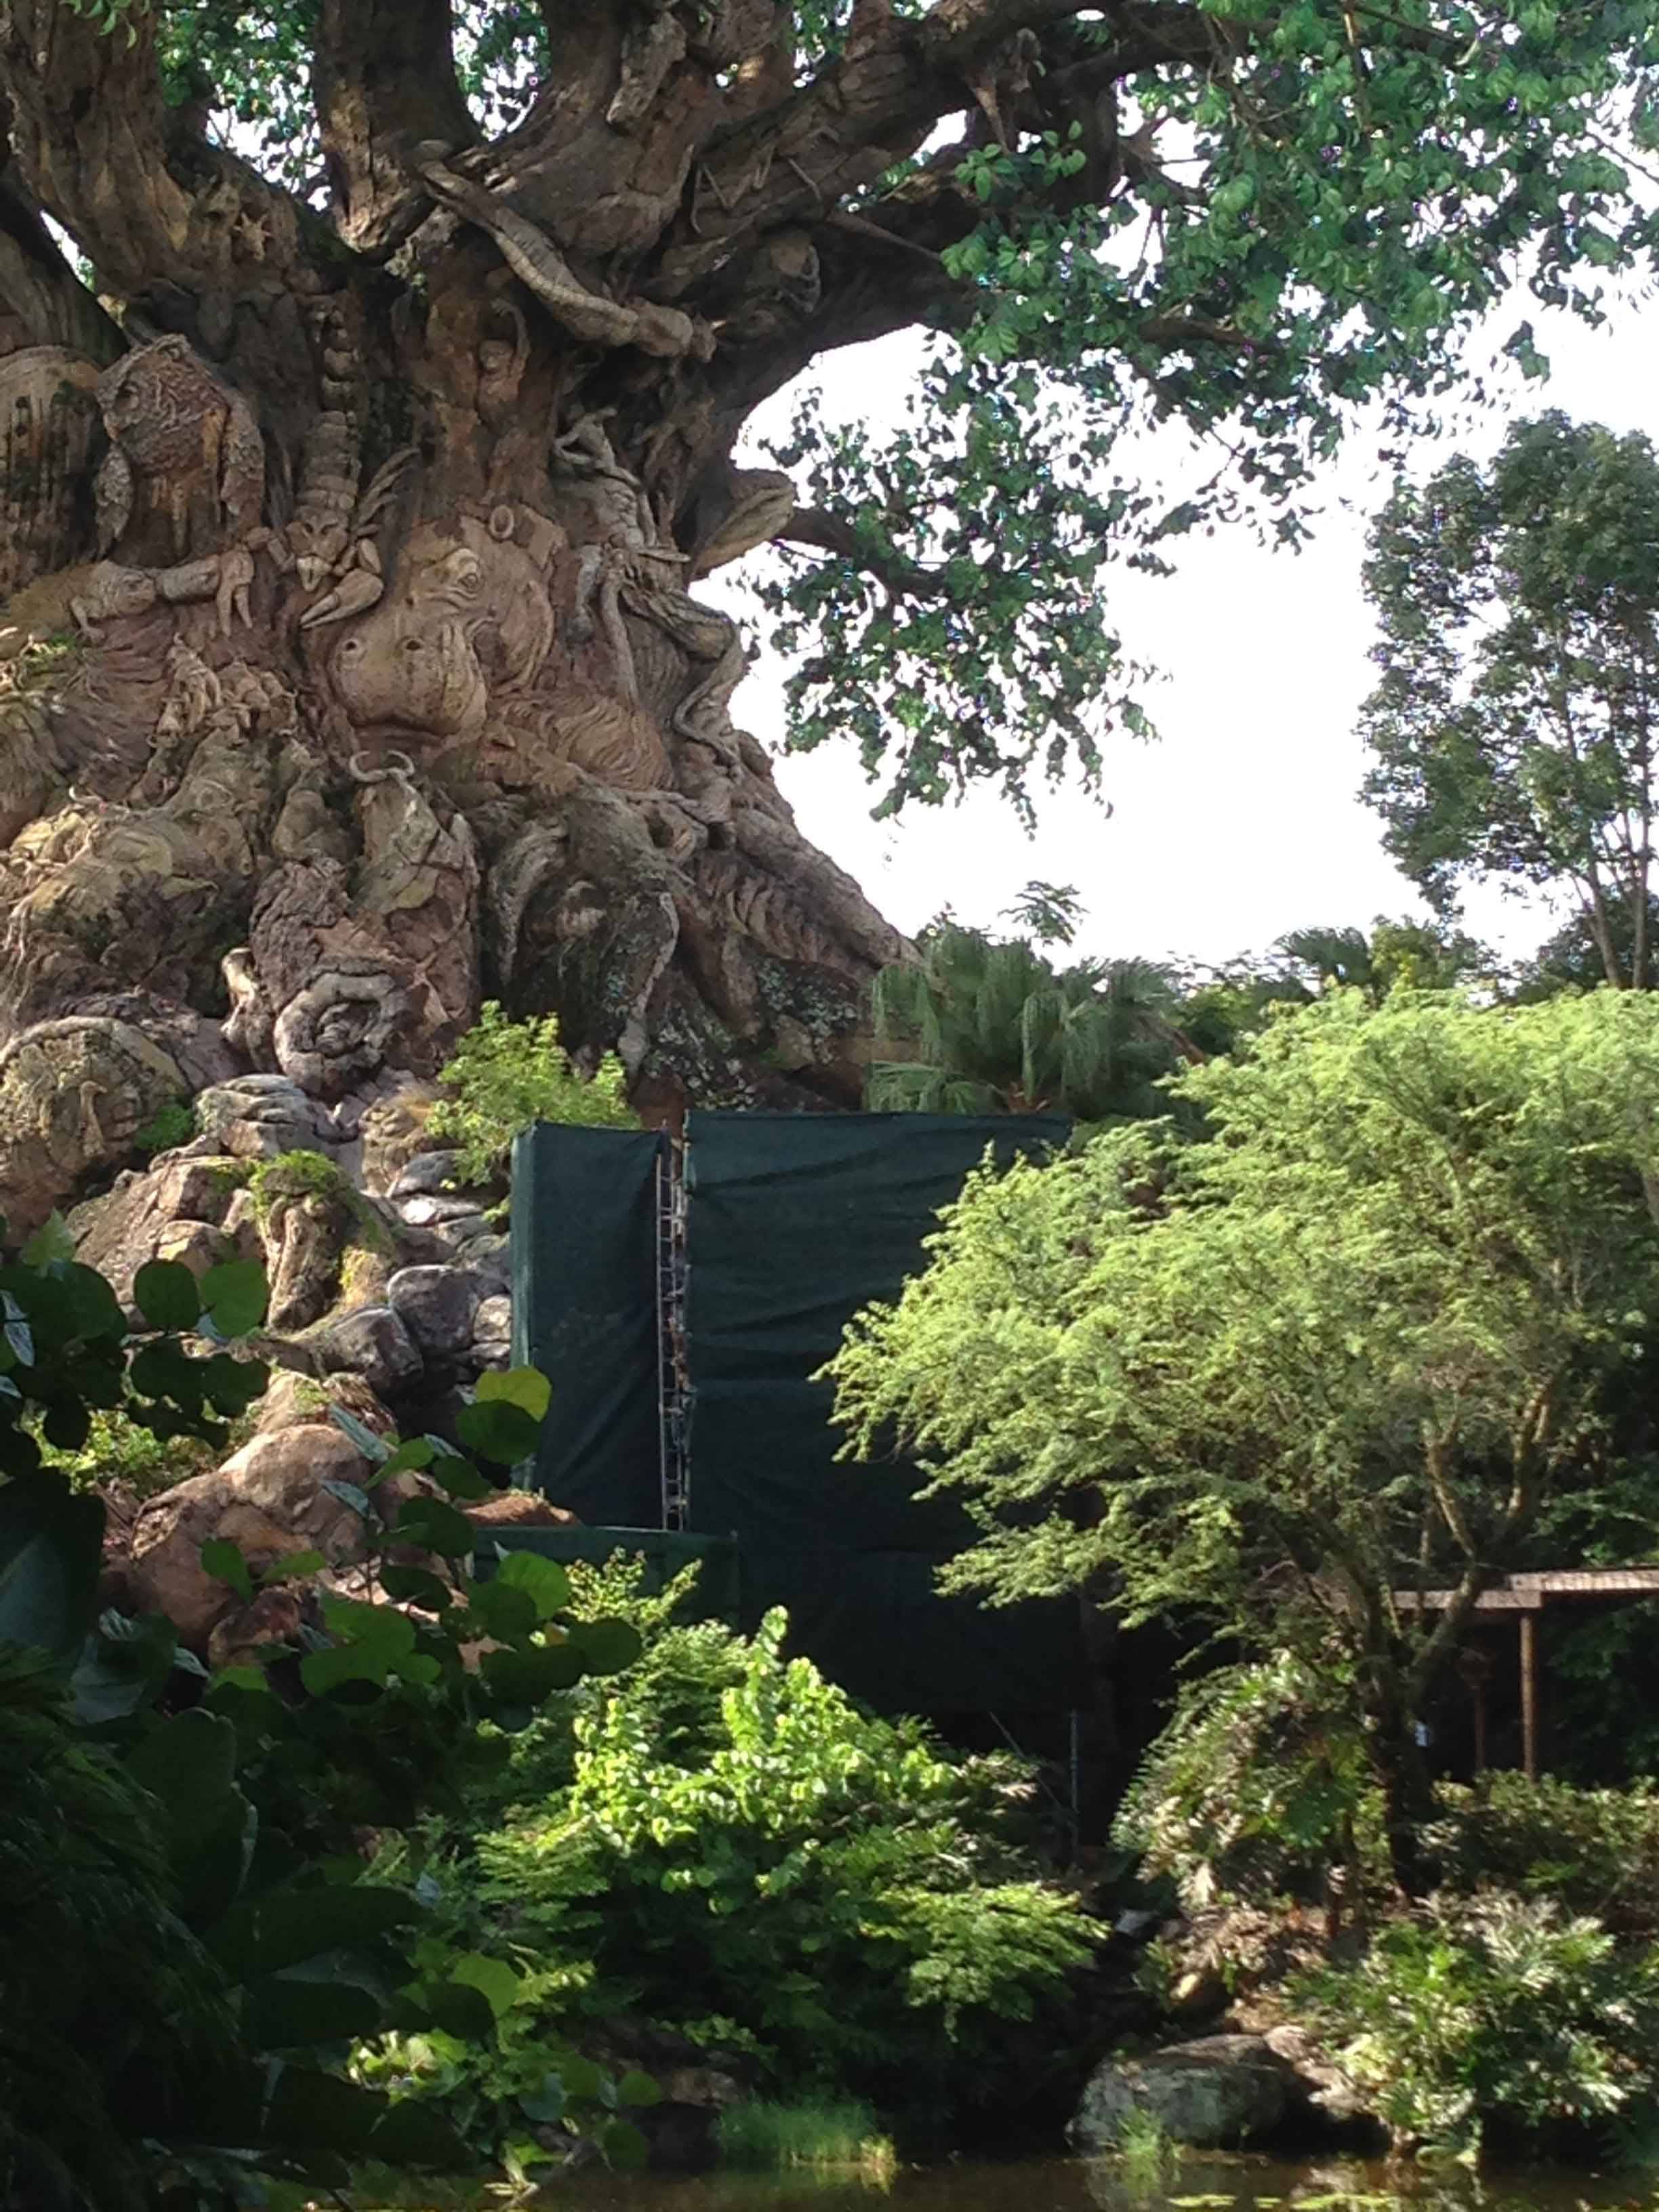 PHOTOS - High reach crane working on Tree of Life during Tough to Be a Bug refurbishment